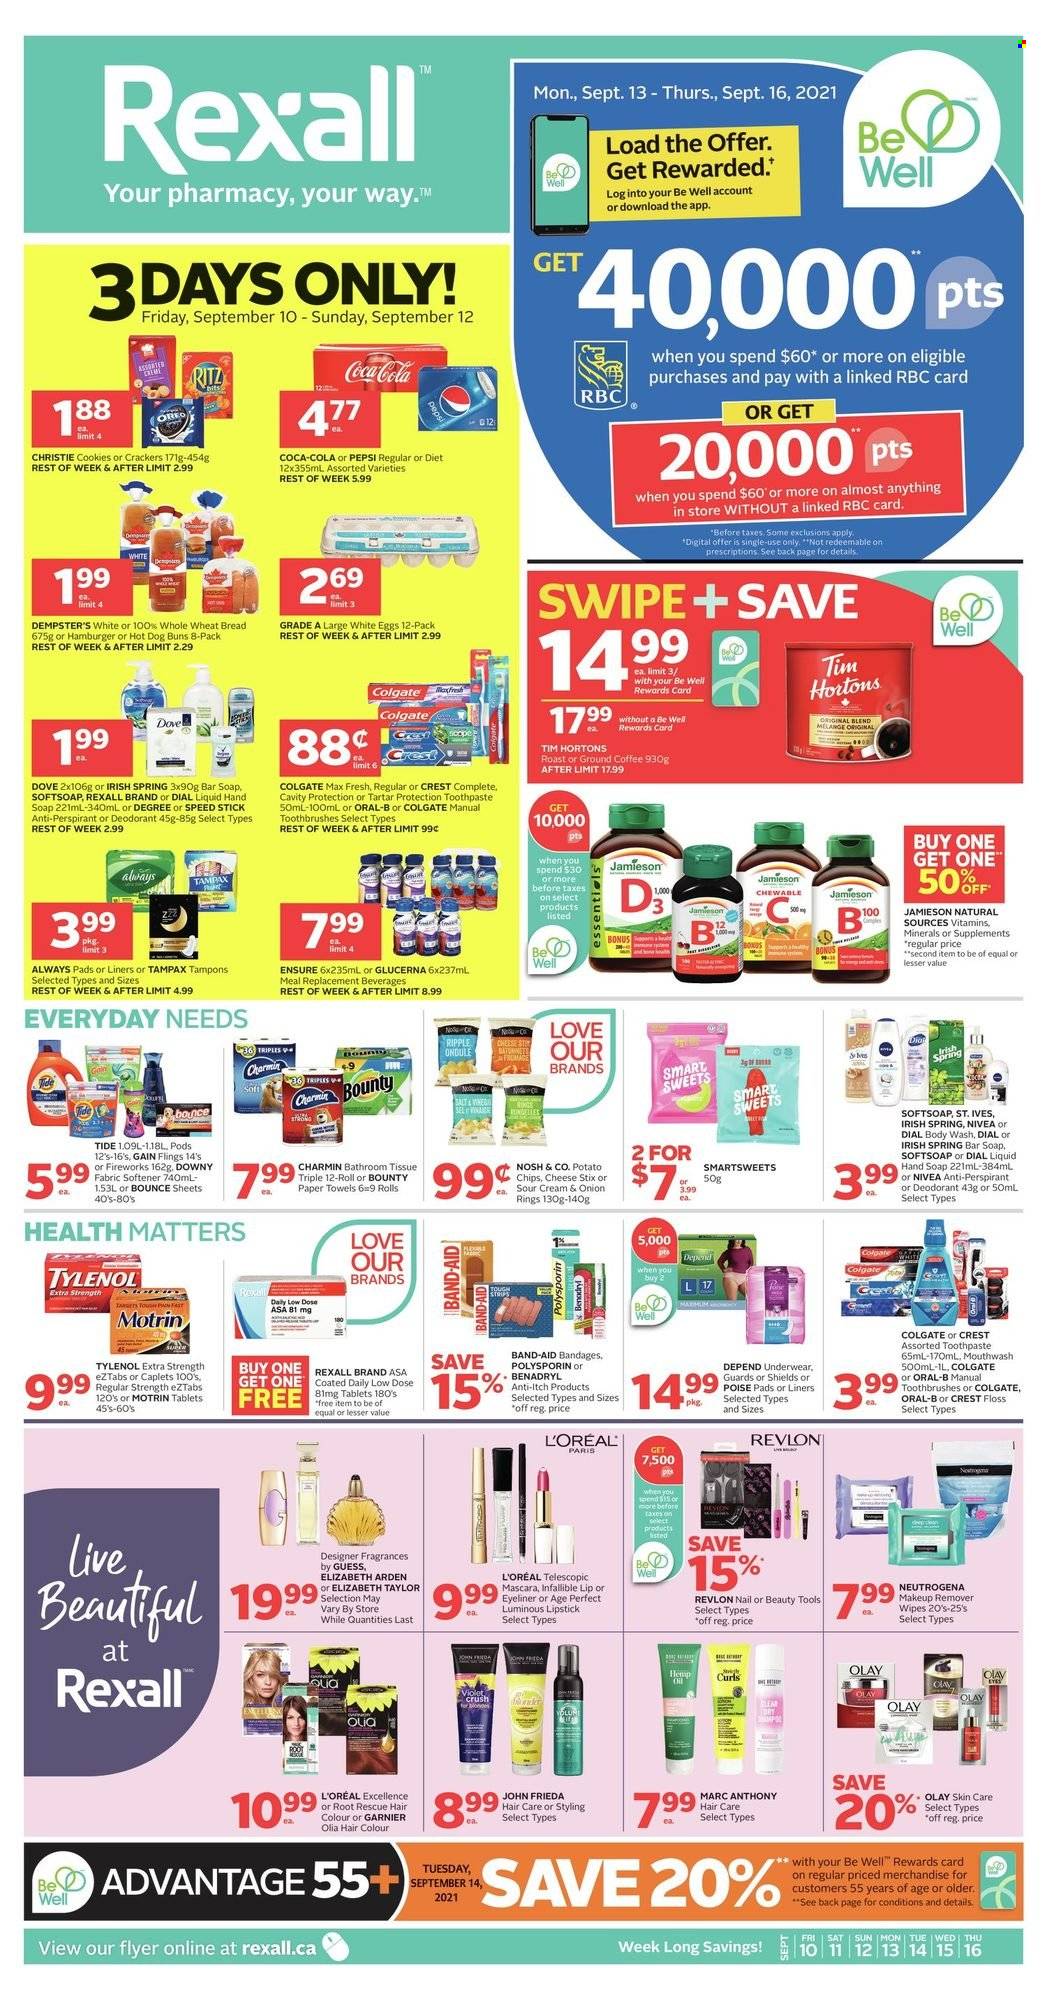 thumbnail - Rexall Flyer - September 10, 2021 - September 16, 2021 - Sales products - cookies, Bounty, crackers, potato chips, onion rings, oil, Coca-Cola, Pepsi, coffee, ground coffee, wipes, bath tissue, kitchen towels, paper towels, Charmin, Gain, Tide, fabric softener, Bounce, Downy Laundry, body wash, Softsoap, hand soap, soap bar, Dial, soap, toothpaste, mouthwash, Crest, Always pads, sanitary pads, tampons, L’Oréal, Olay, Revlon, hair color, John Frieda, anti-perspirant, Speed Stick, Guess, lipstick, makeup remover, eyeliner, Tylenol, Glucerna, vitamin D3, Low Dose, Motrin, Oreo, band-aid, Dove, Elizabeth Arden, Colgate, Garnier, mascara, Neutrogena, Tampax, Nivea, Oral-B, chips, deodorant. Page 1.